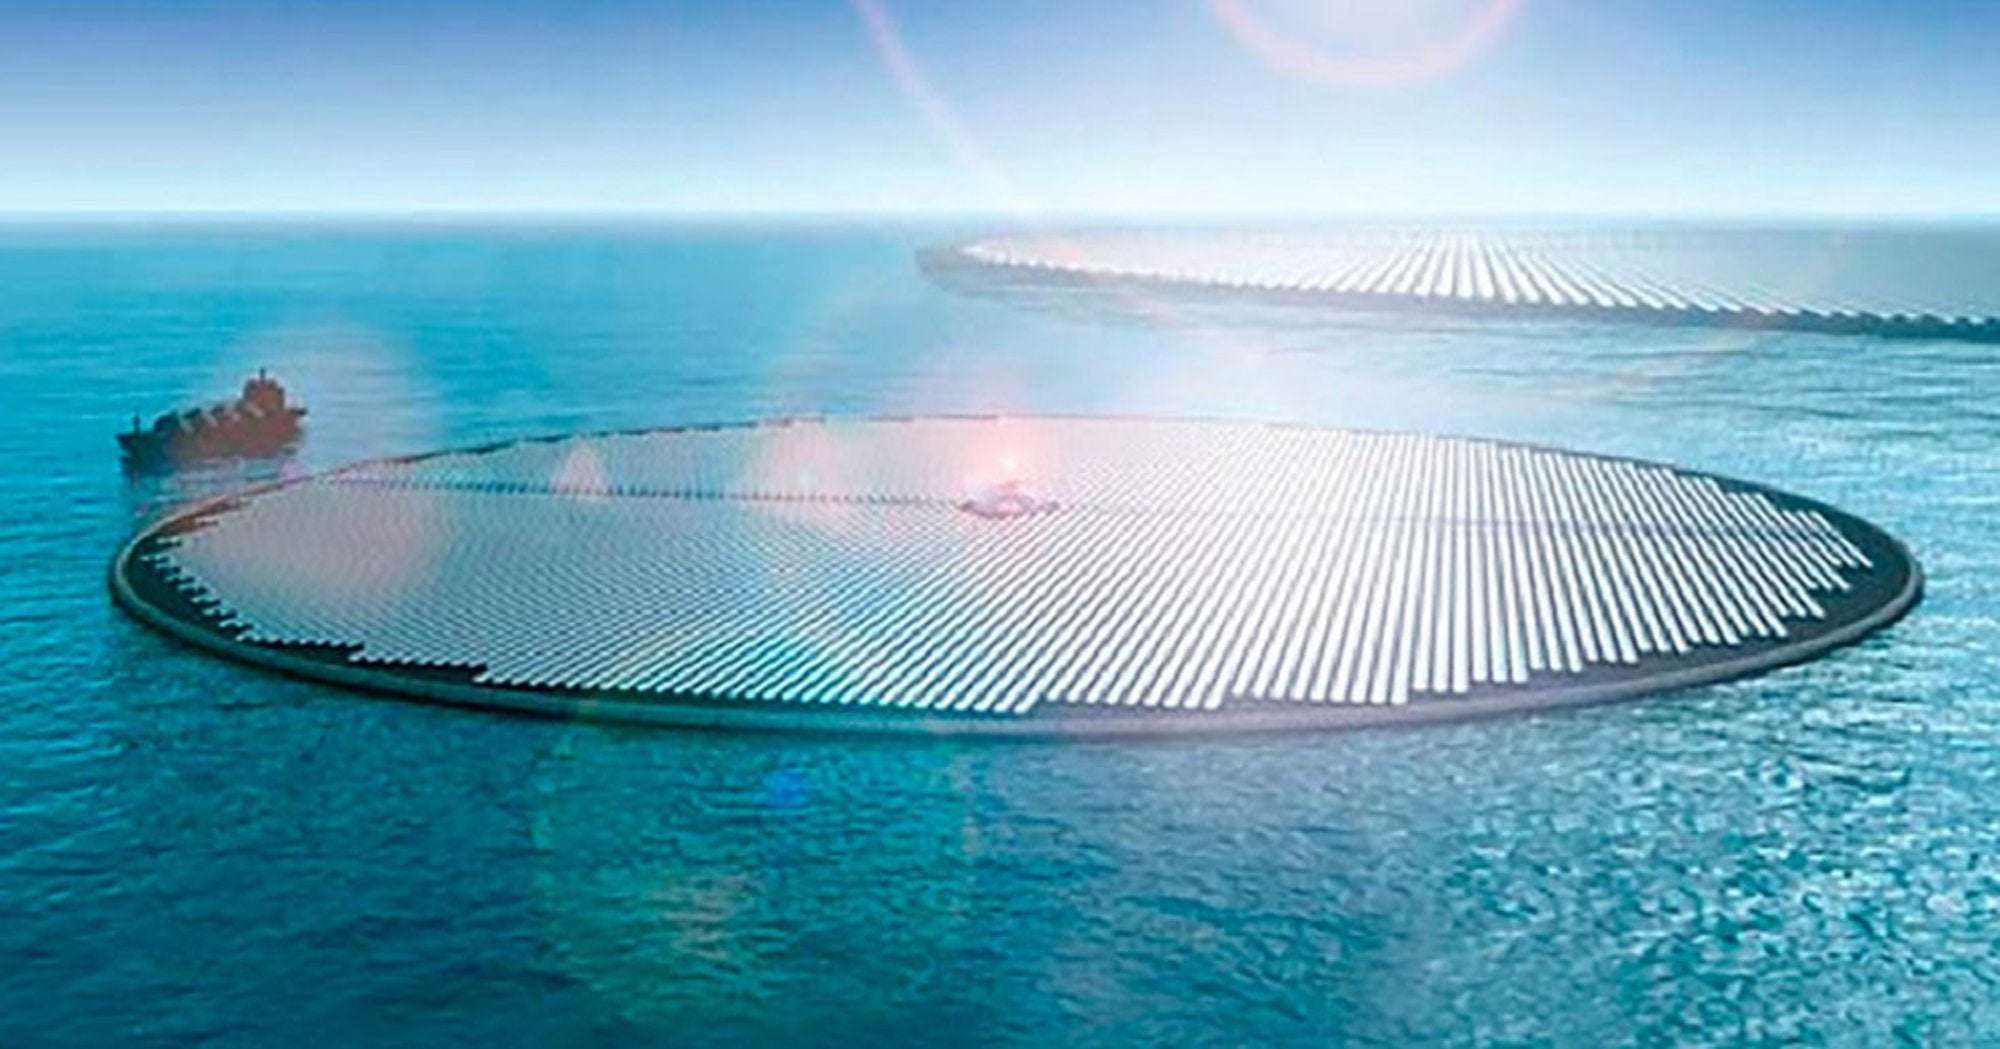 image for Giant Floating Solar Farms Could Make Fuel and Help Solve the Climate Crisis, Says Study